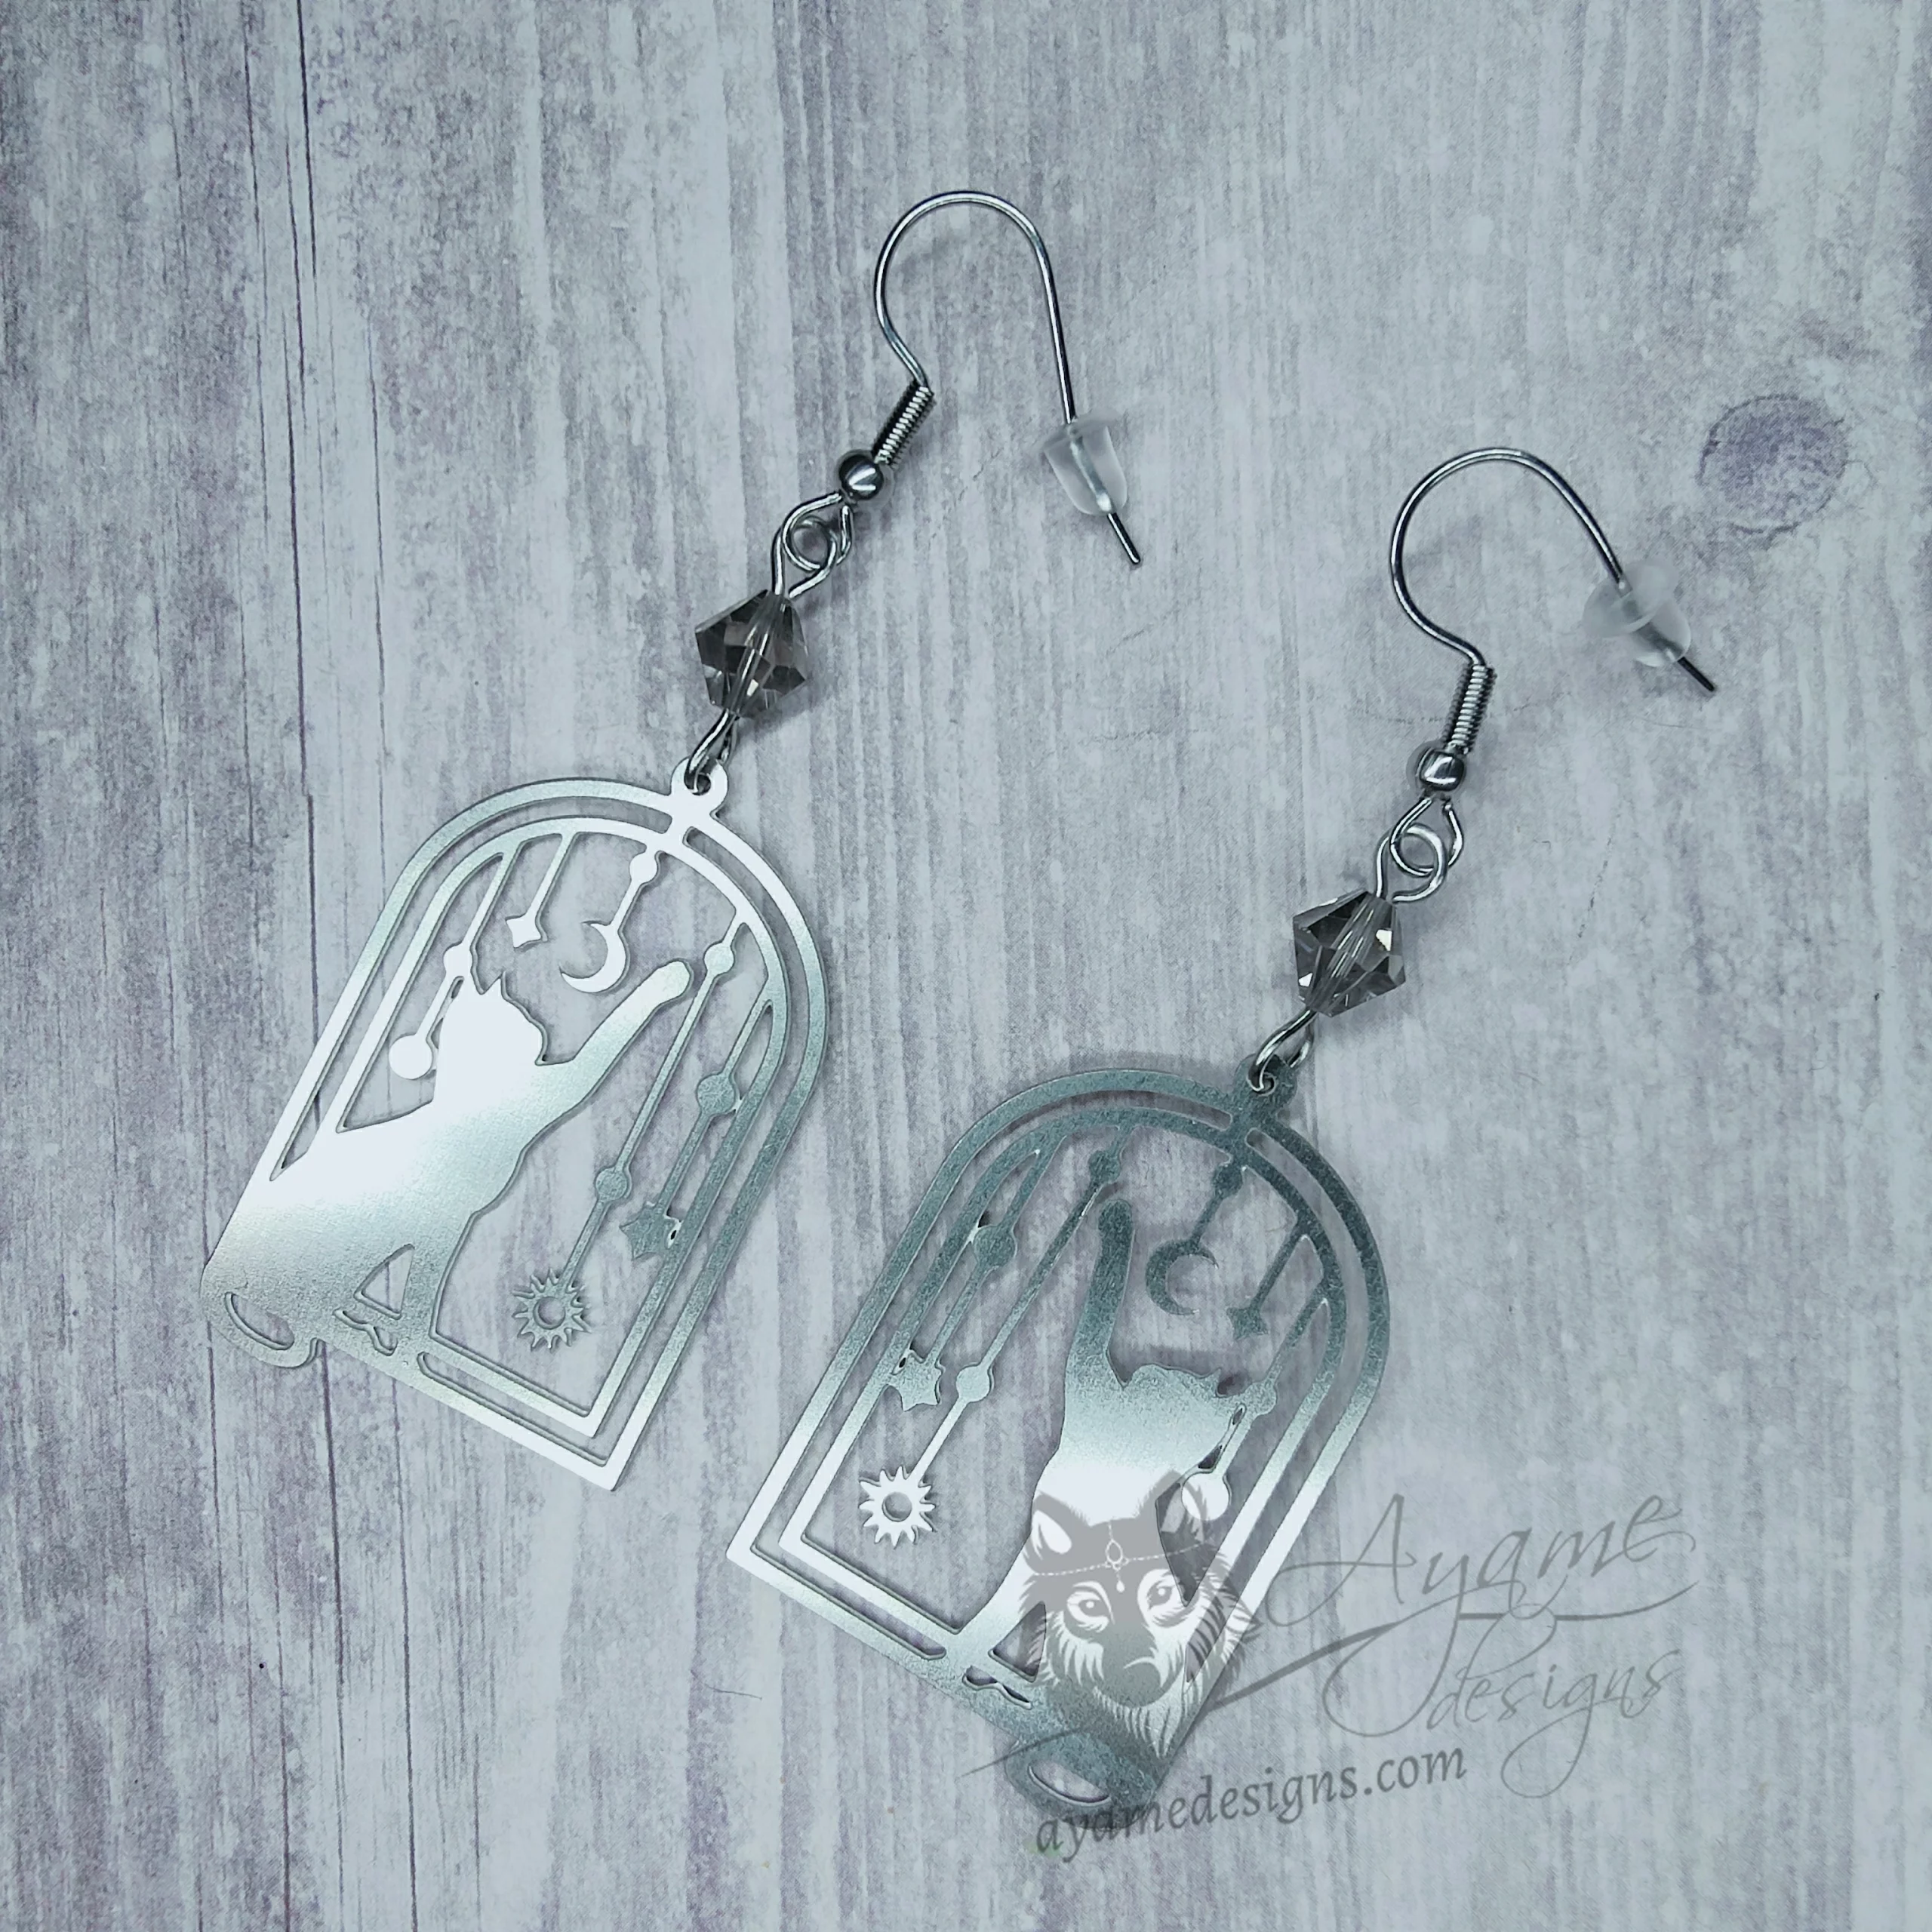 Handmade earrings with laser cut stainless steel cat charms with grey Austrian crystal beads, on stainless steel earring hooks